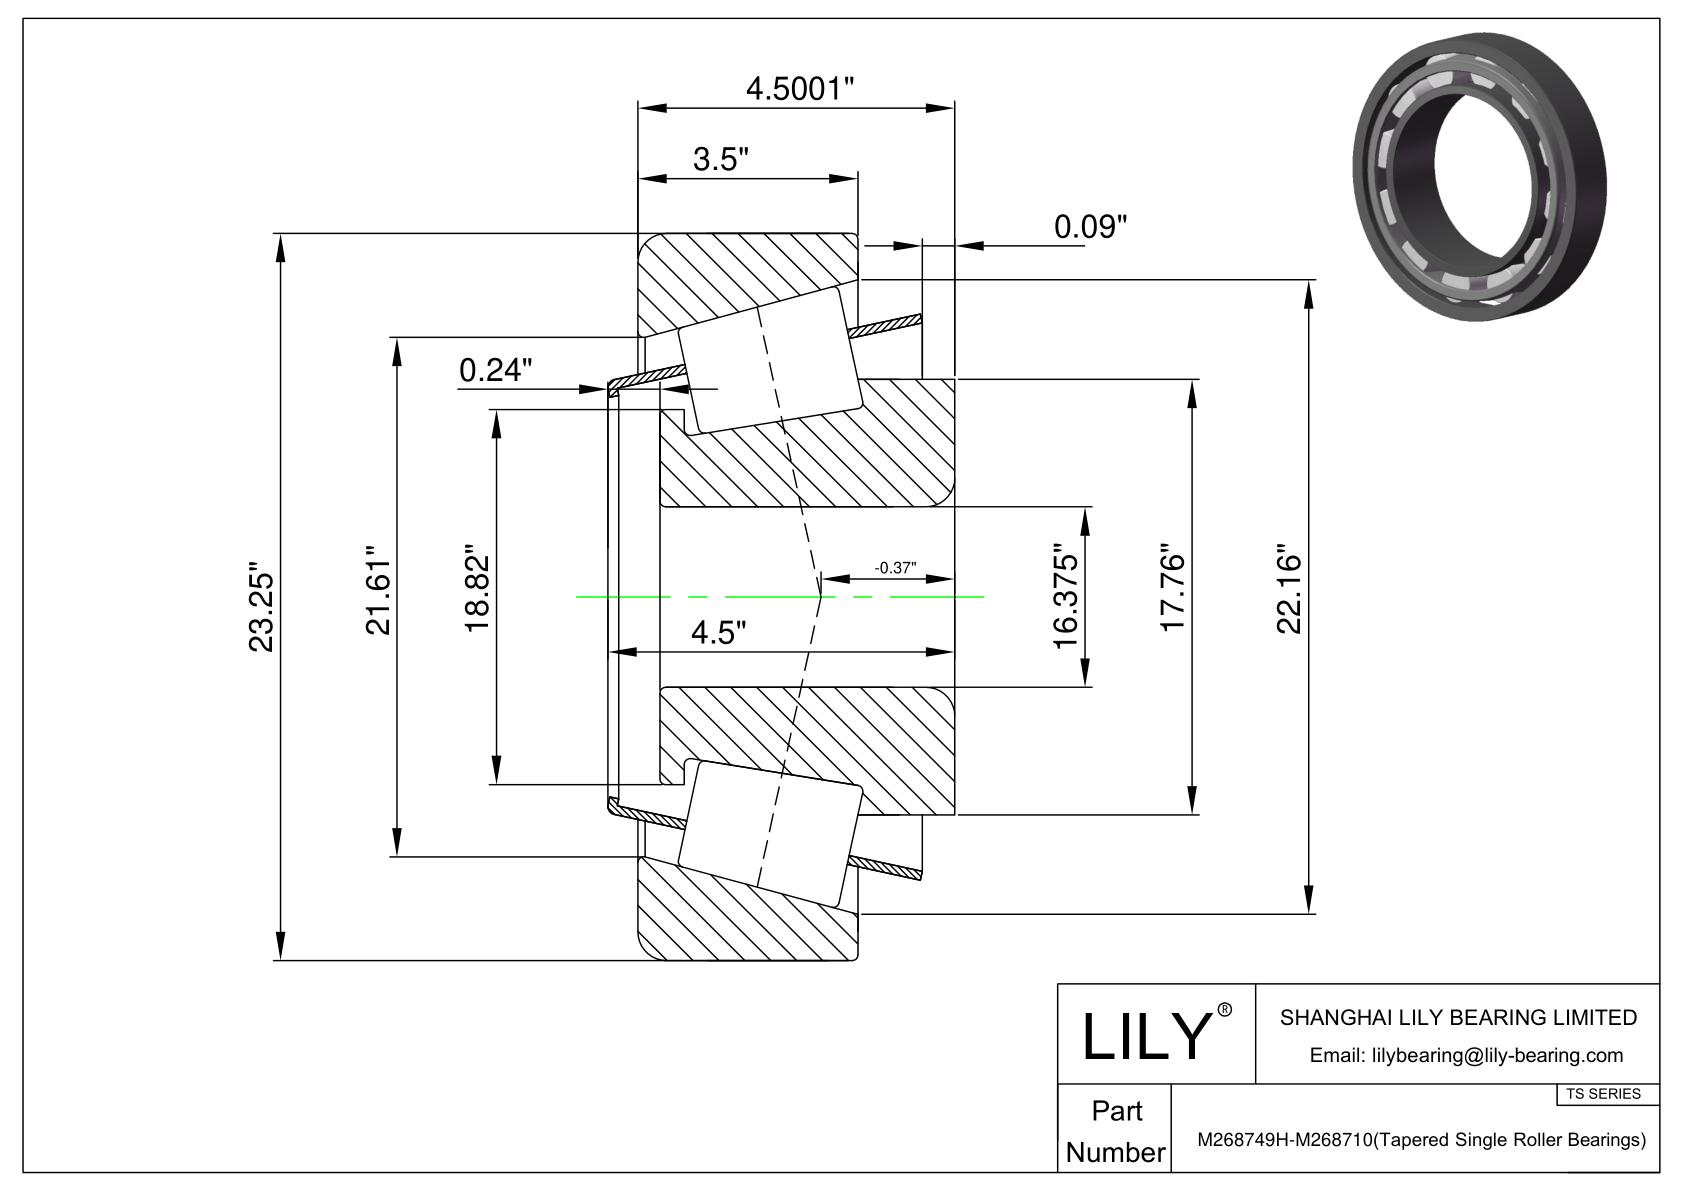 M268749H-M268710 TS (Tapered Single Roller Bearings) (Imperial) cad drawing